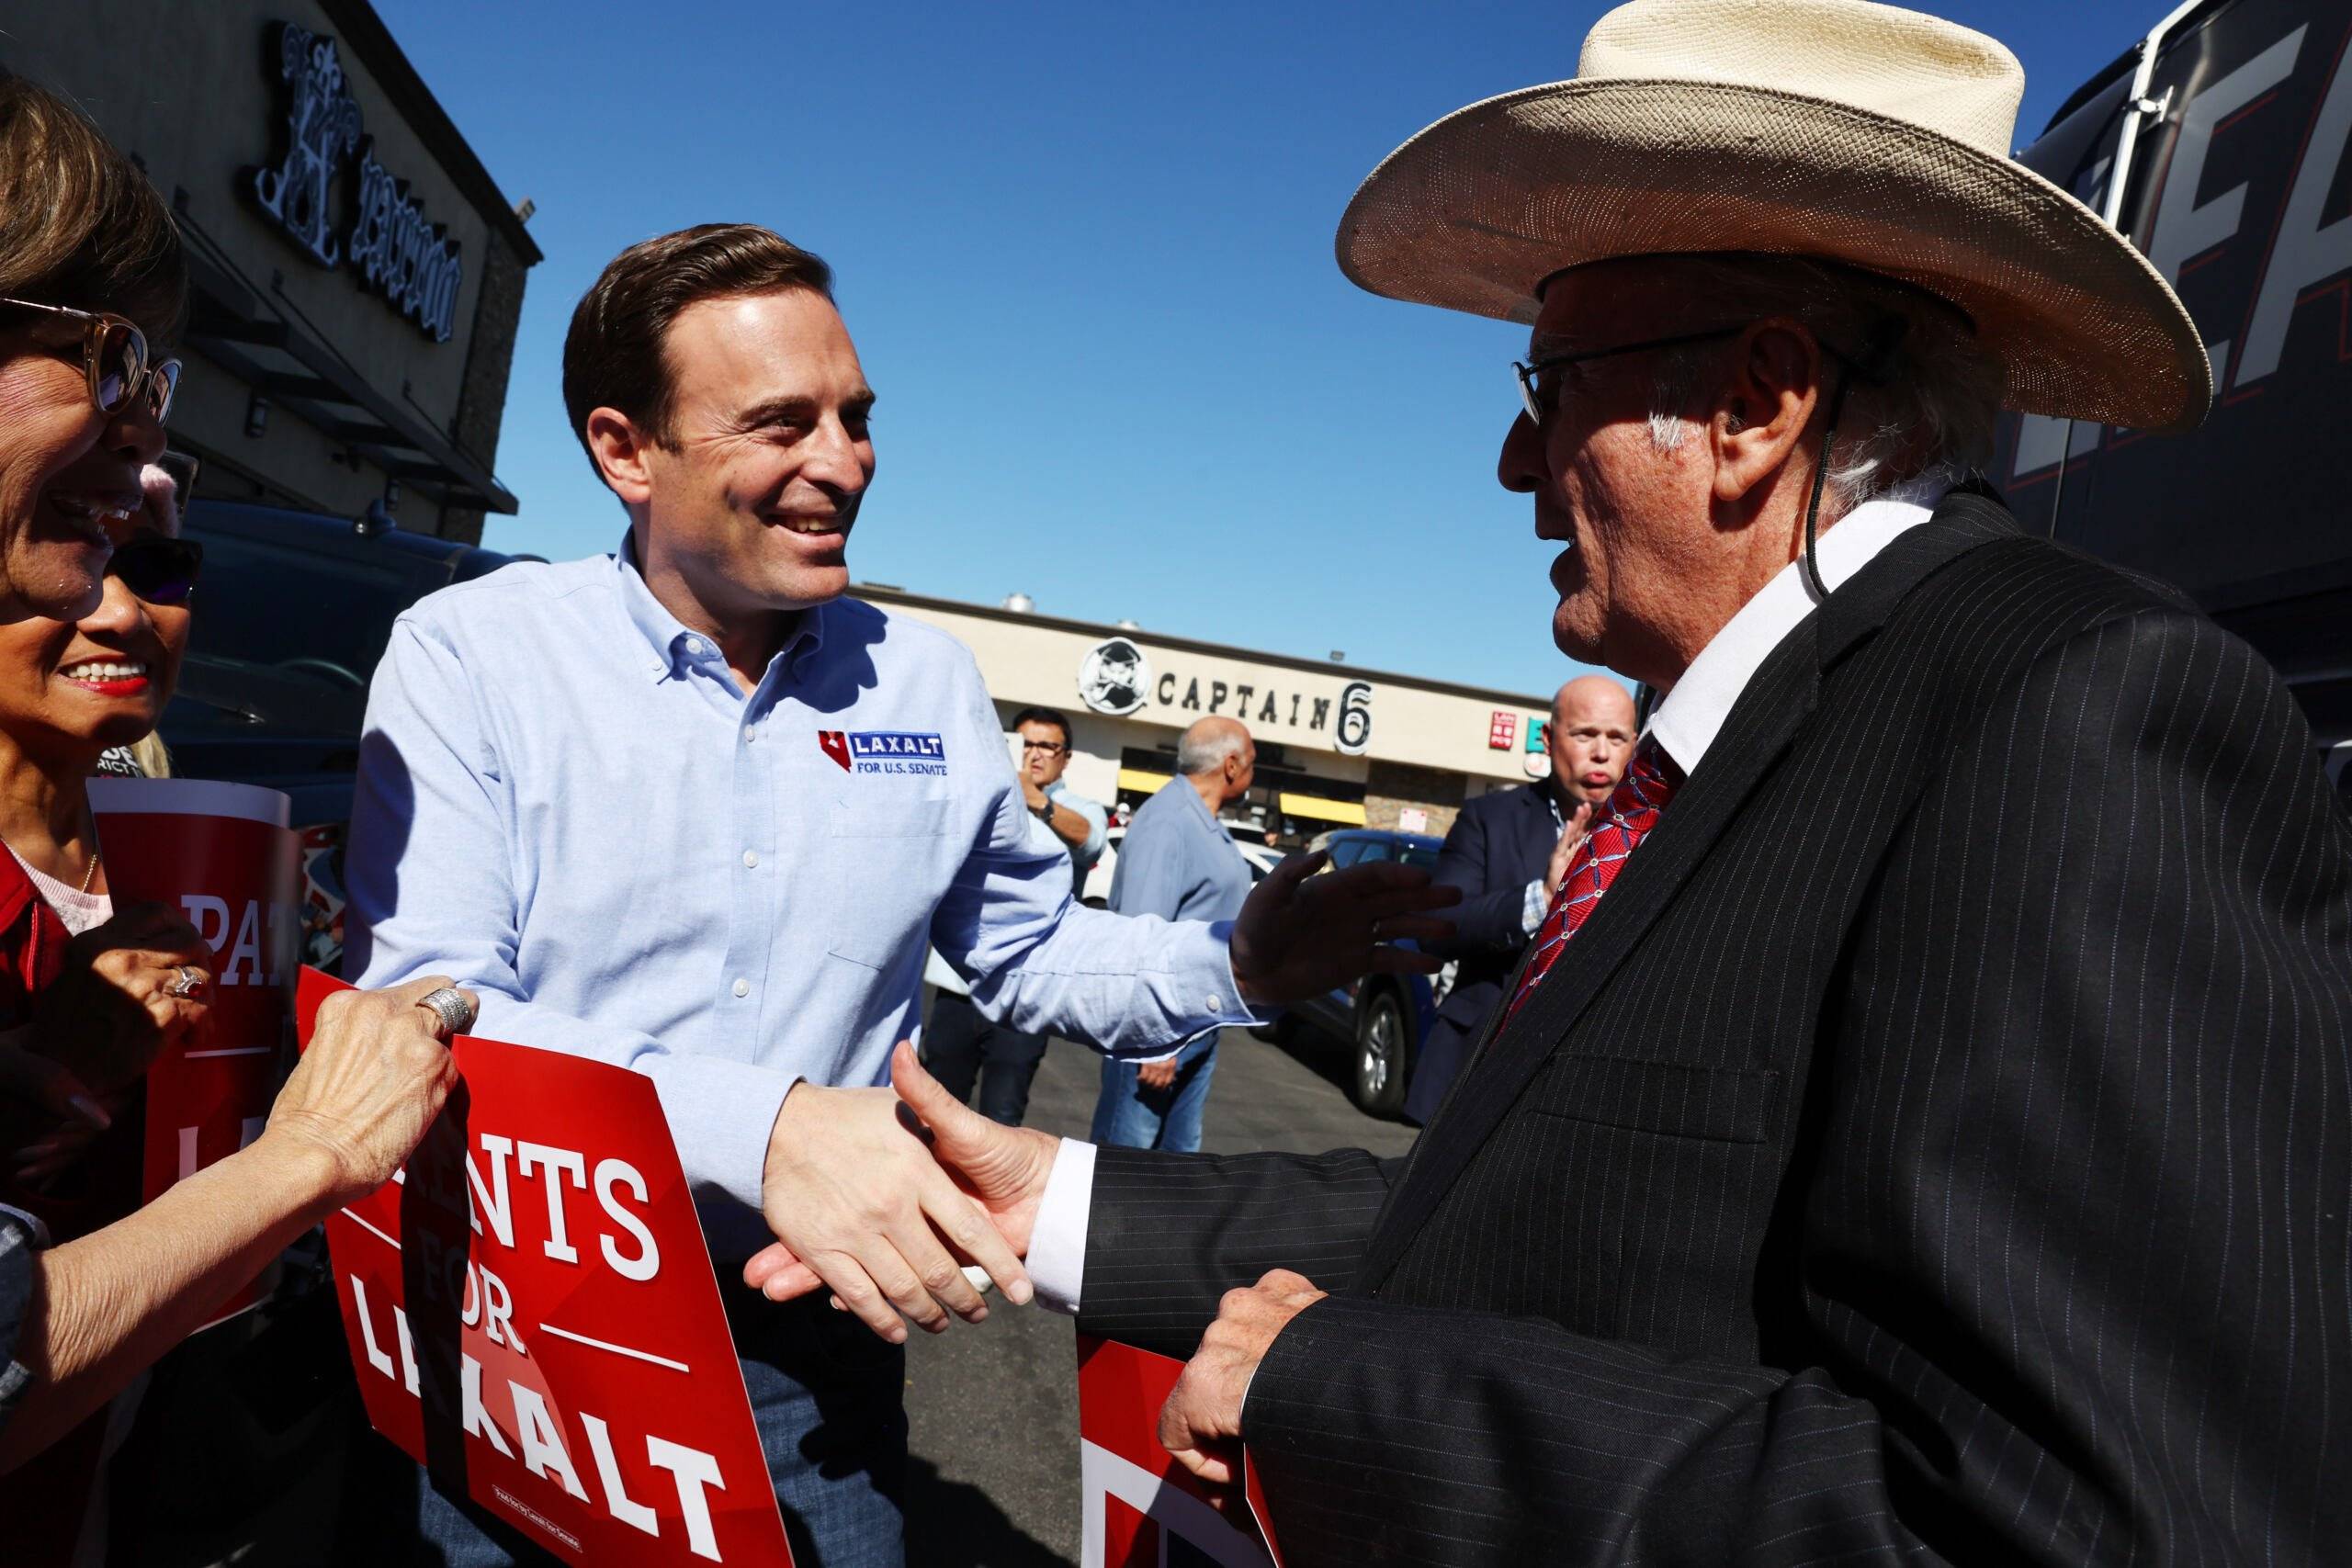 LAS VEGAS, NEVADA - NOVEMBER 04: Nevada Republican U.S. Senate nominee Adam Laxalt (LEFT C) greets supporters at a campaign stop outside the Nevada GOP Asian Pacific American (APA) Engagement Community Center on November 04, 2022 in Las Vegas, Nevada. On the final day of early voting, Laxalt, a former Attorney General of Nevada, continues to make stops on his tour through the 17 counties of the state in his campaign to unseat incumbent U.S. Sen. Catherine Cortez Masto (D-NV).   Mario Tama/Getty Images/AFP (Photo by MARIO TAMA / GETTY IMAGES NORTH AMERICA / Getty Images via AFP)